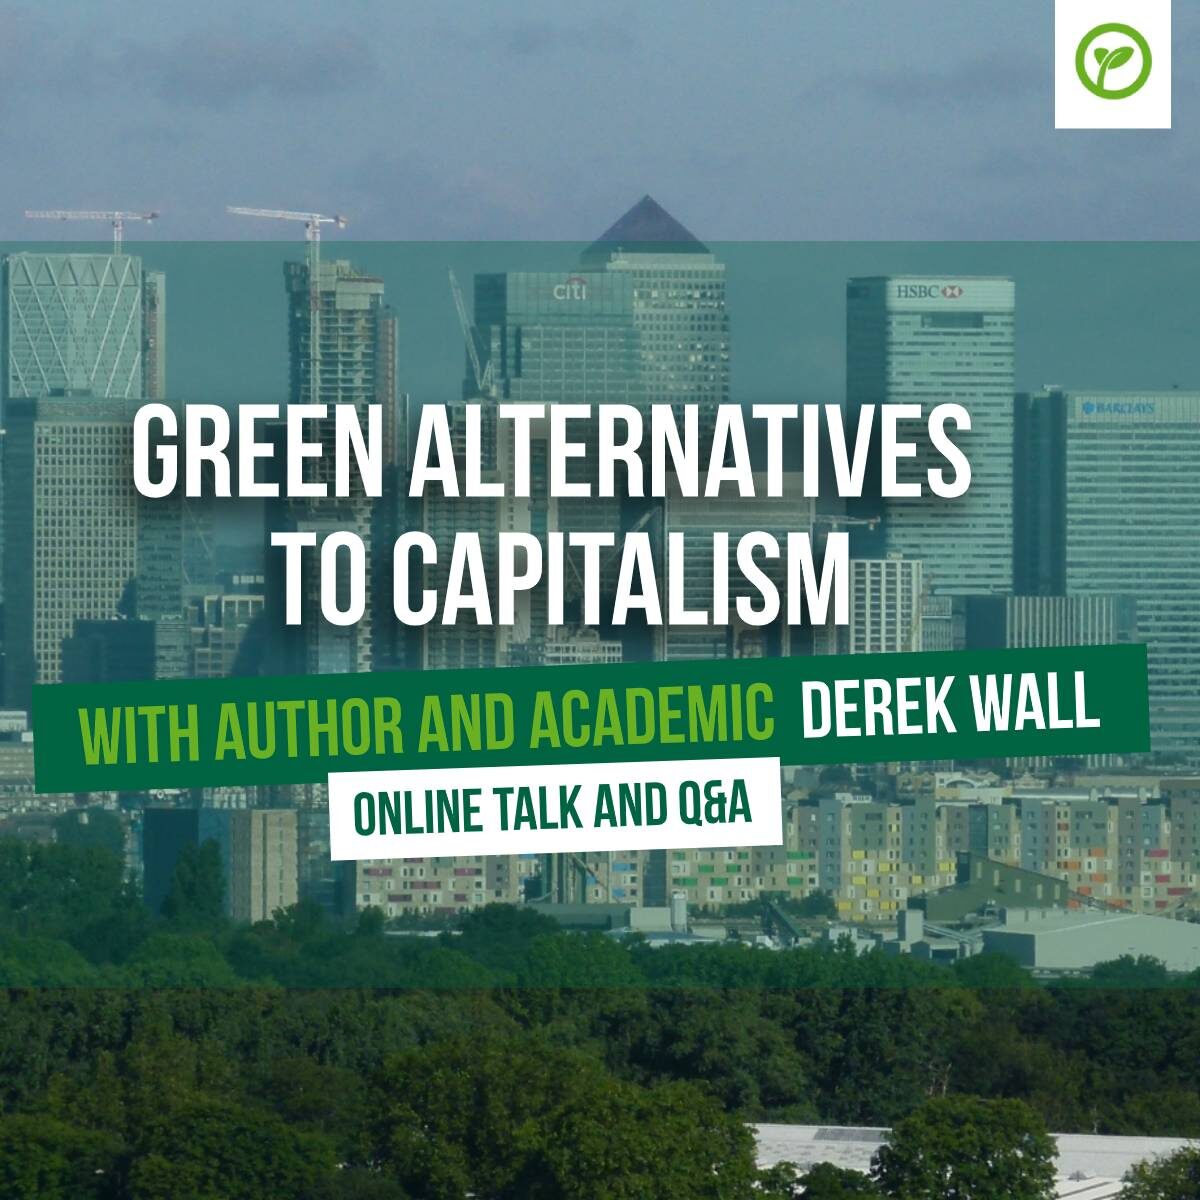 Green Alternatives to Capitalism with Author and Academic Derek Wall - Online Talk and Q&A